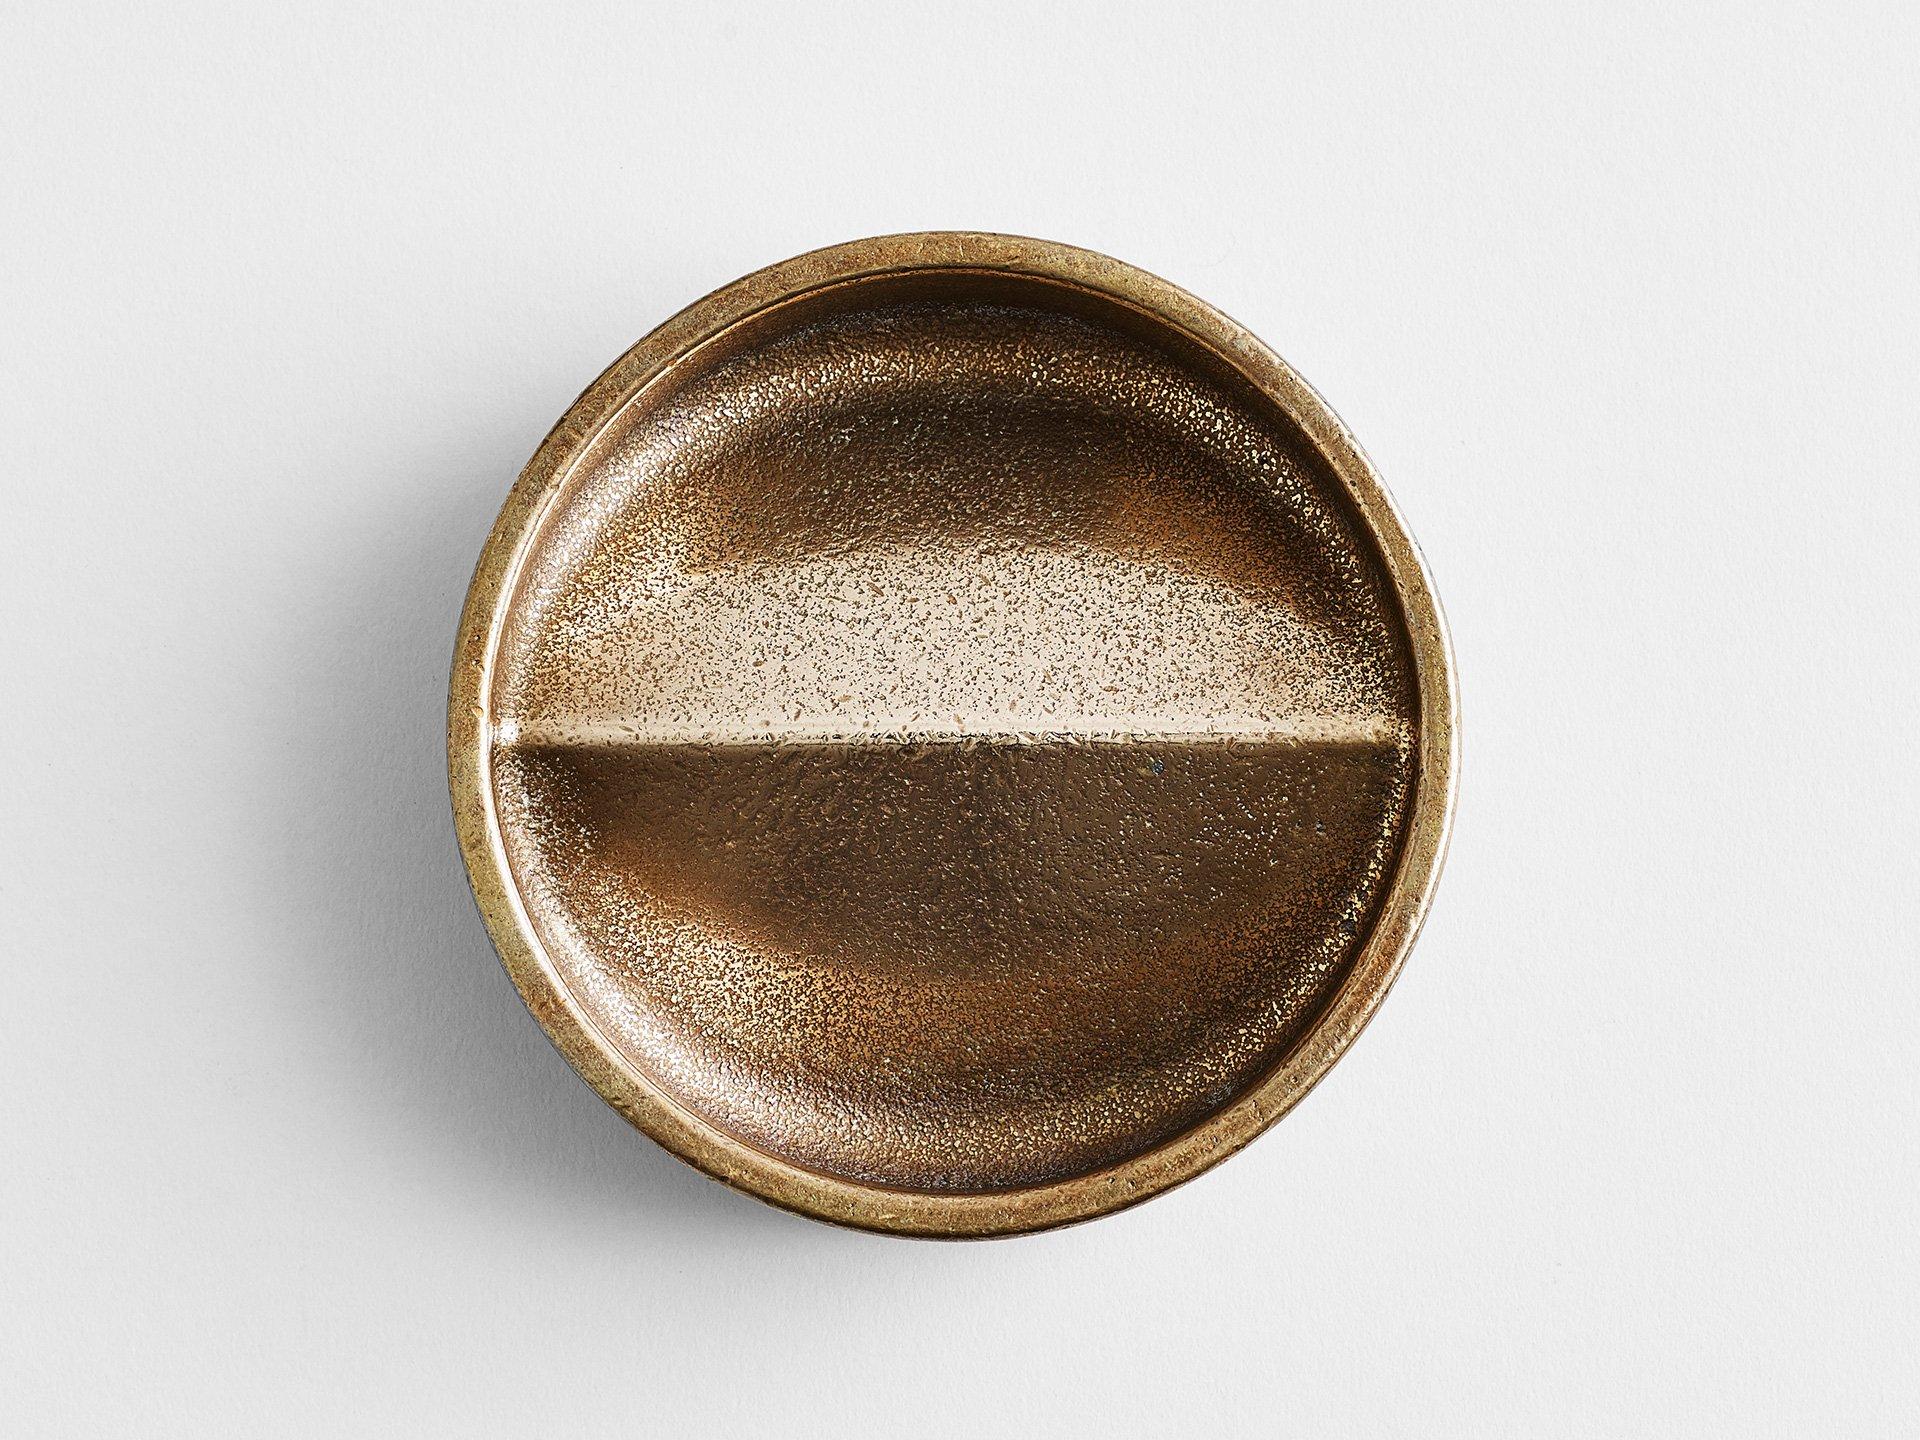 Bronze Vide Poche Rond by Henry Wilson
Dimensions: D 13 x H 4 cm
Materials: Bronze

Discard your day at the door.

Your Vide Poche is designed with your loose-pocket items in mind – think keys, change and phone. It is made, polished and finished in